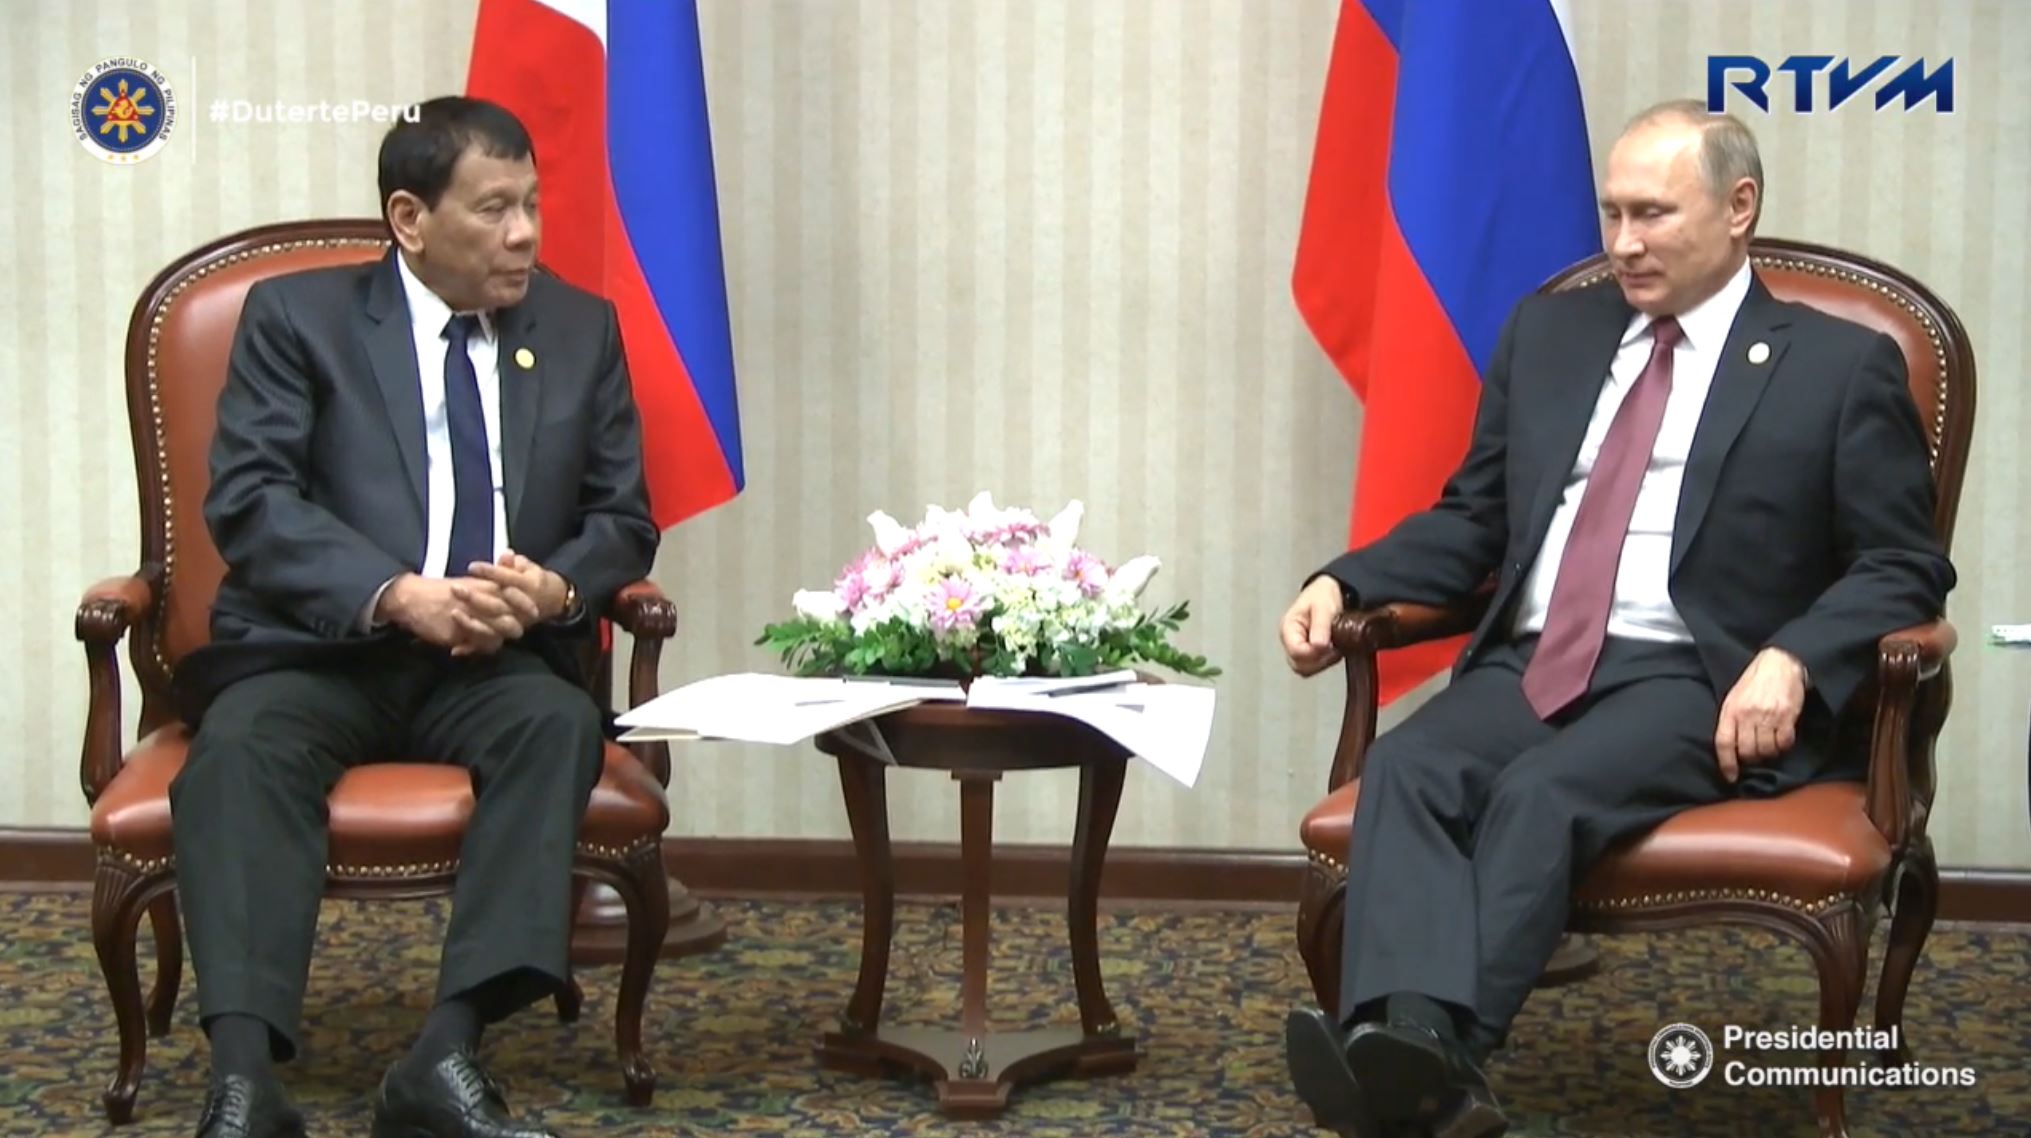 Philippine President Rodrigo Duterte and President Vladimir Putin of the Russian Federation holds a bilateral meeting at the Swissôtel Lima in Lima, Peru. (Photo grabbed from RTVM video)